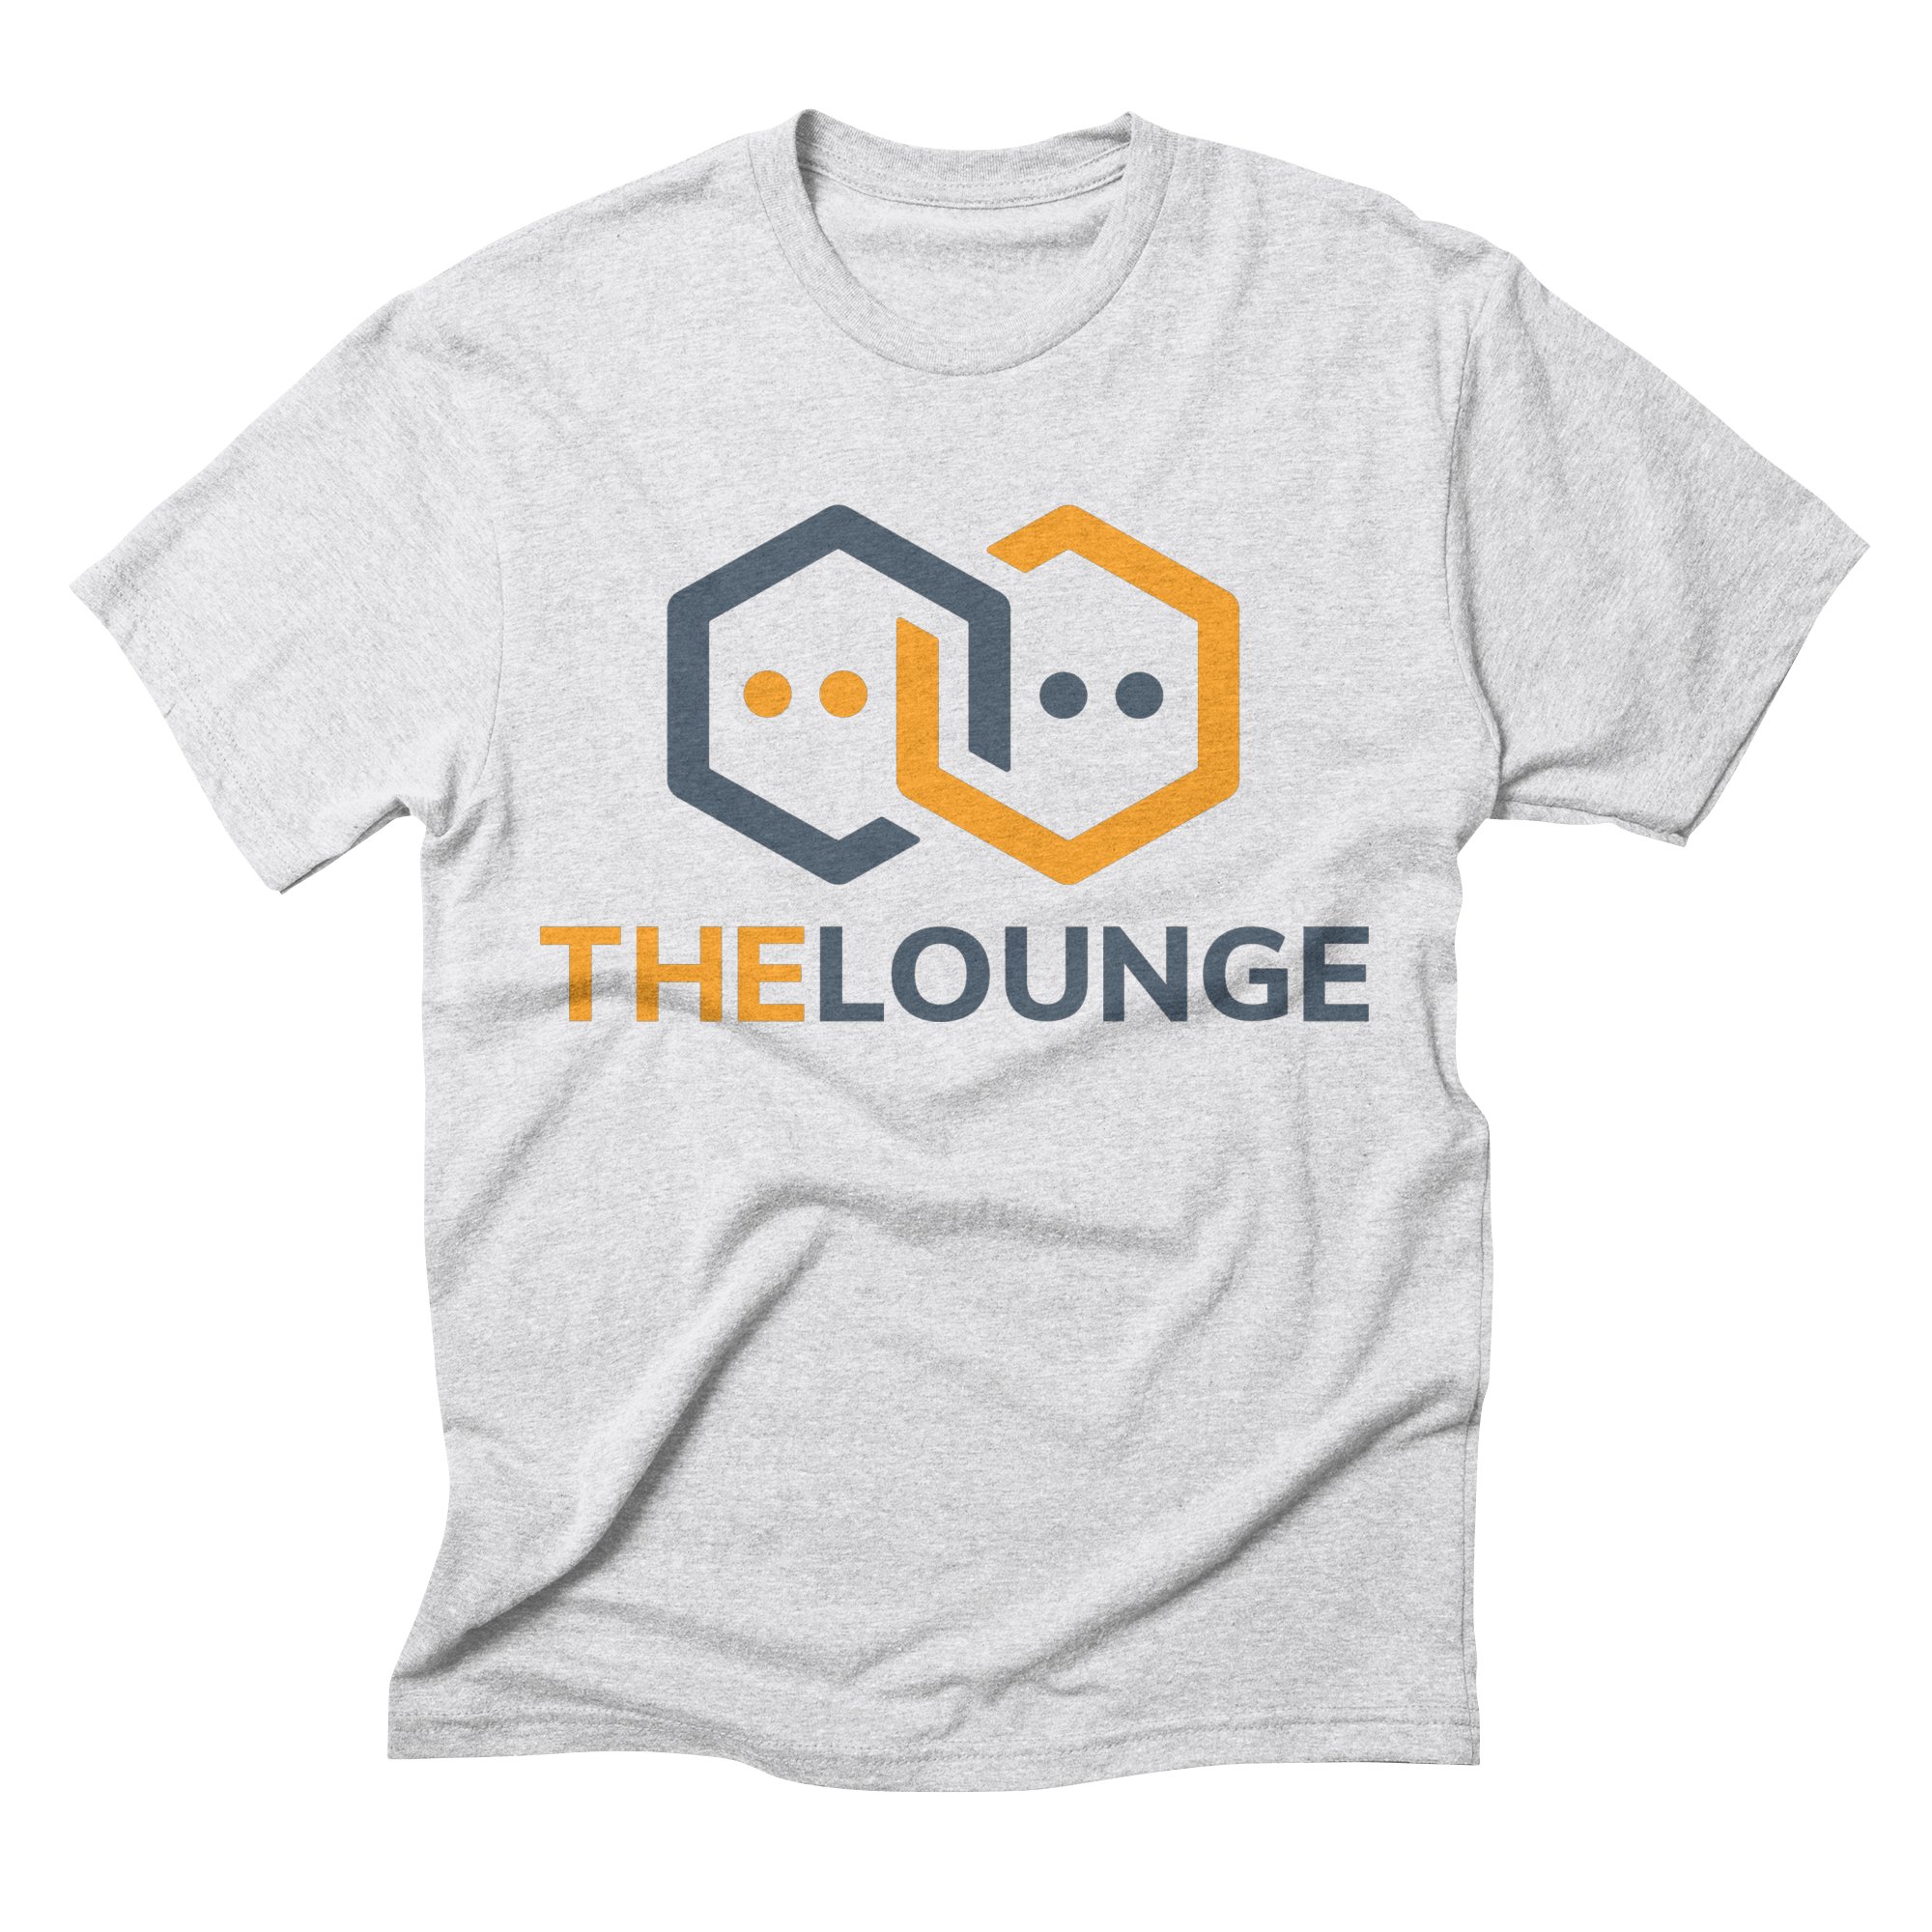 White t-shirt with The Lounge logo